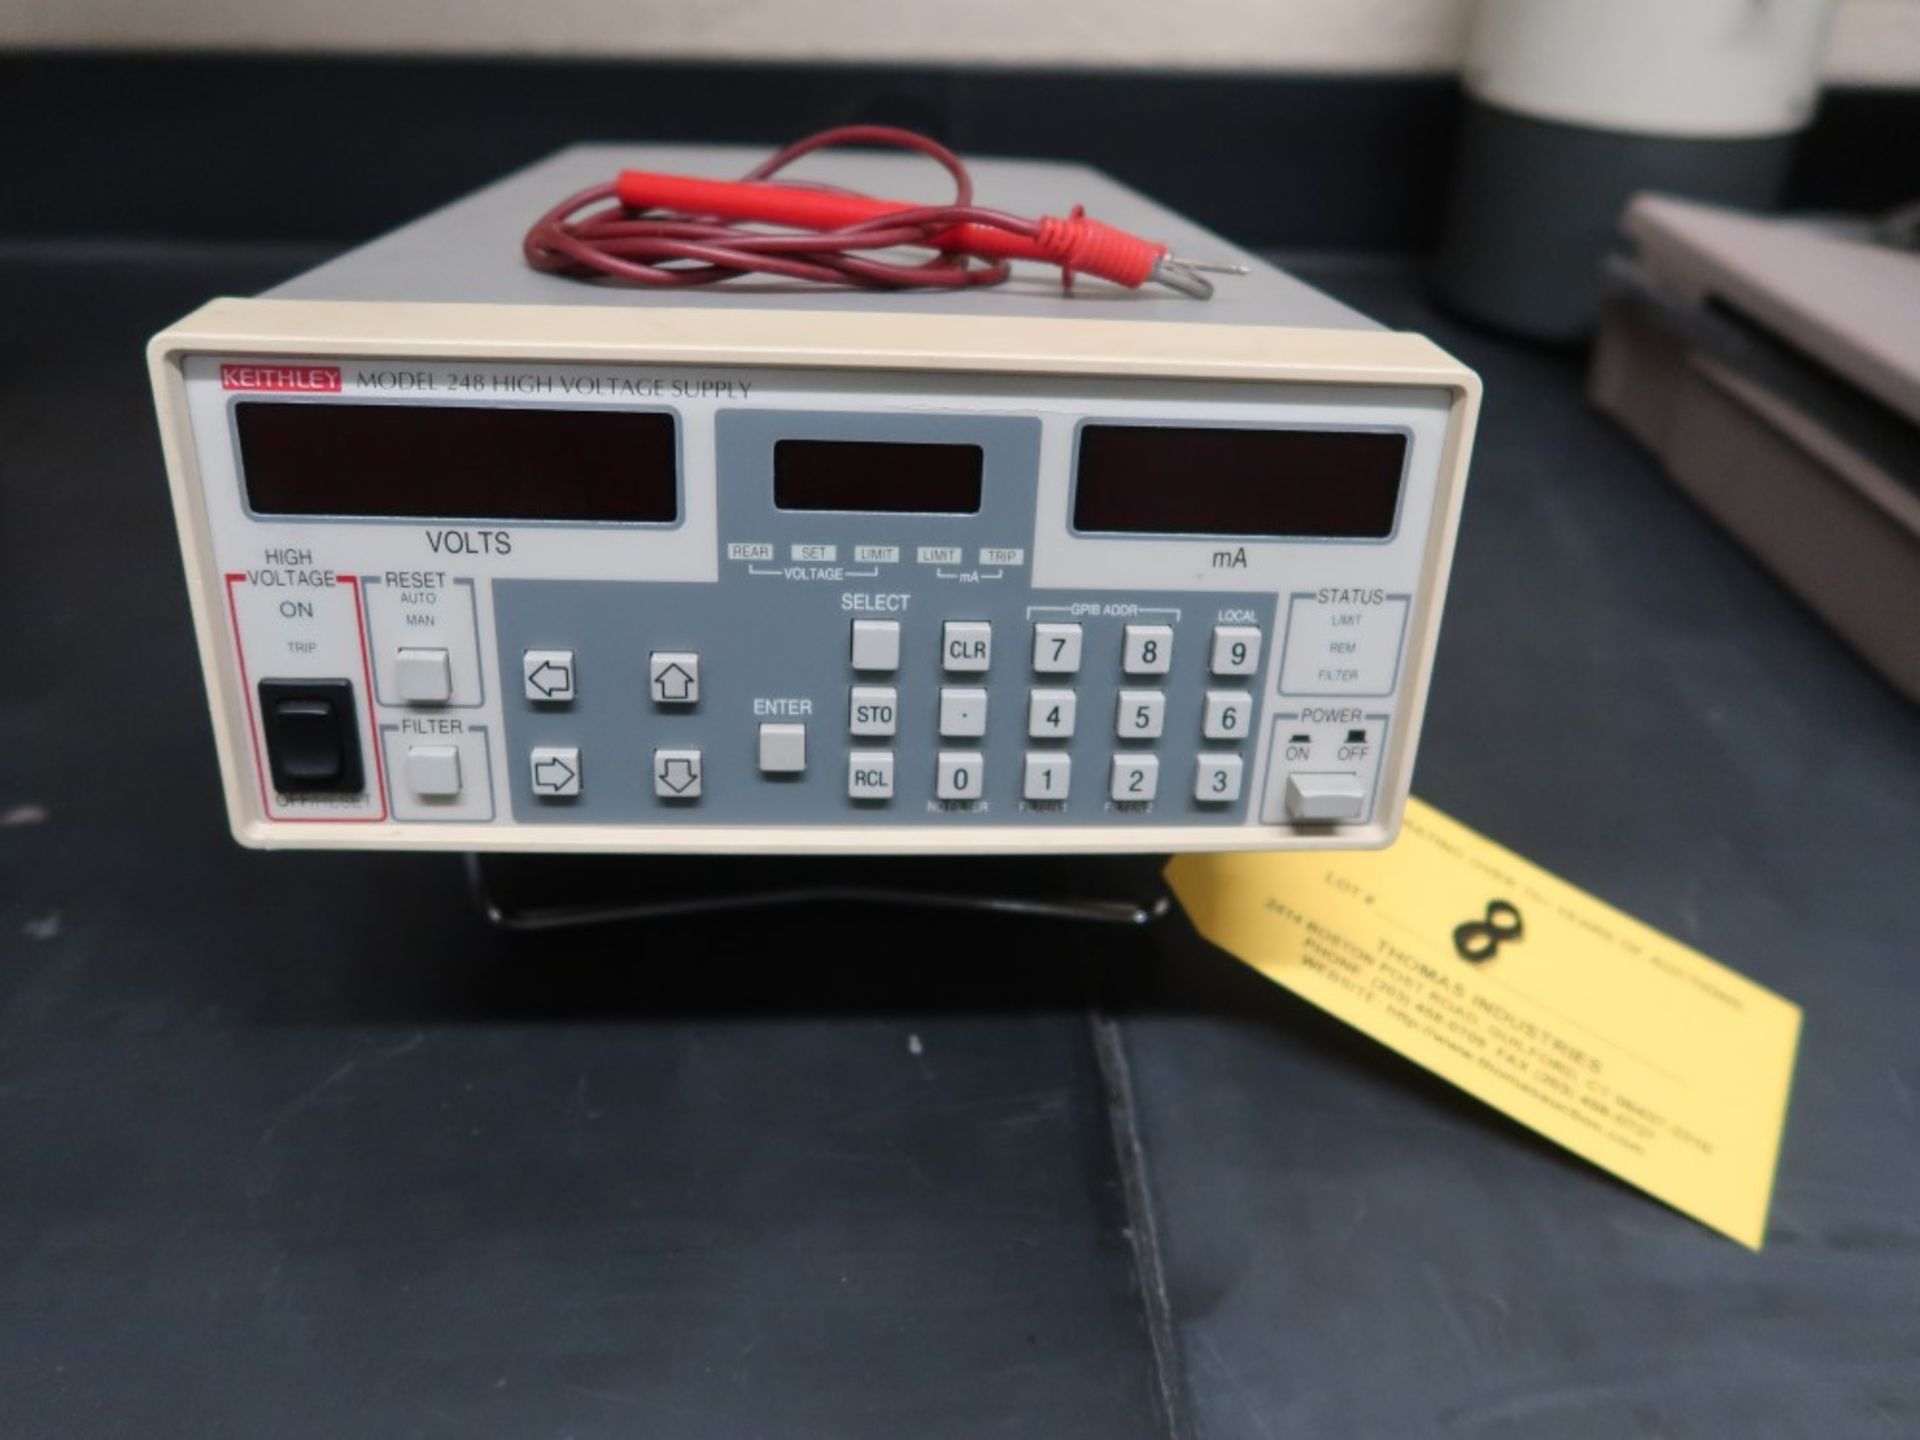 Keithley Model 248 High Voltage Supply S/N S000643 - Image 2 of 2